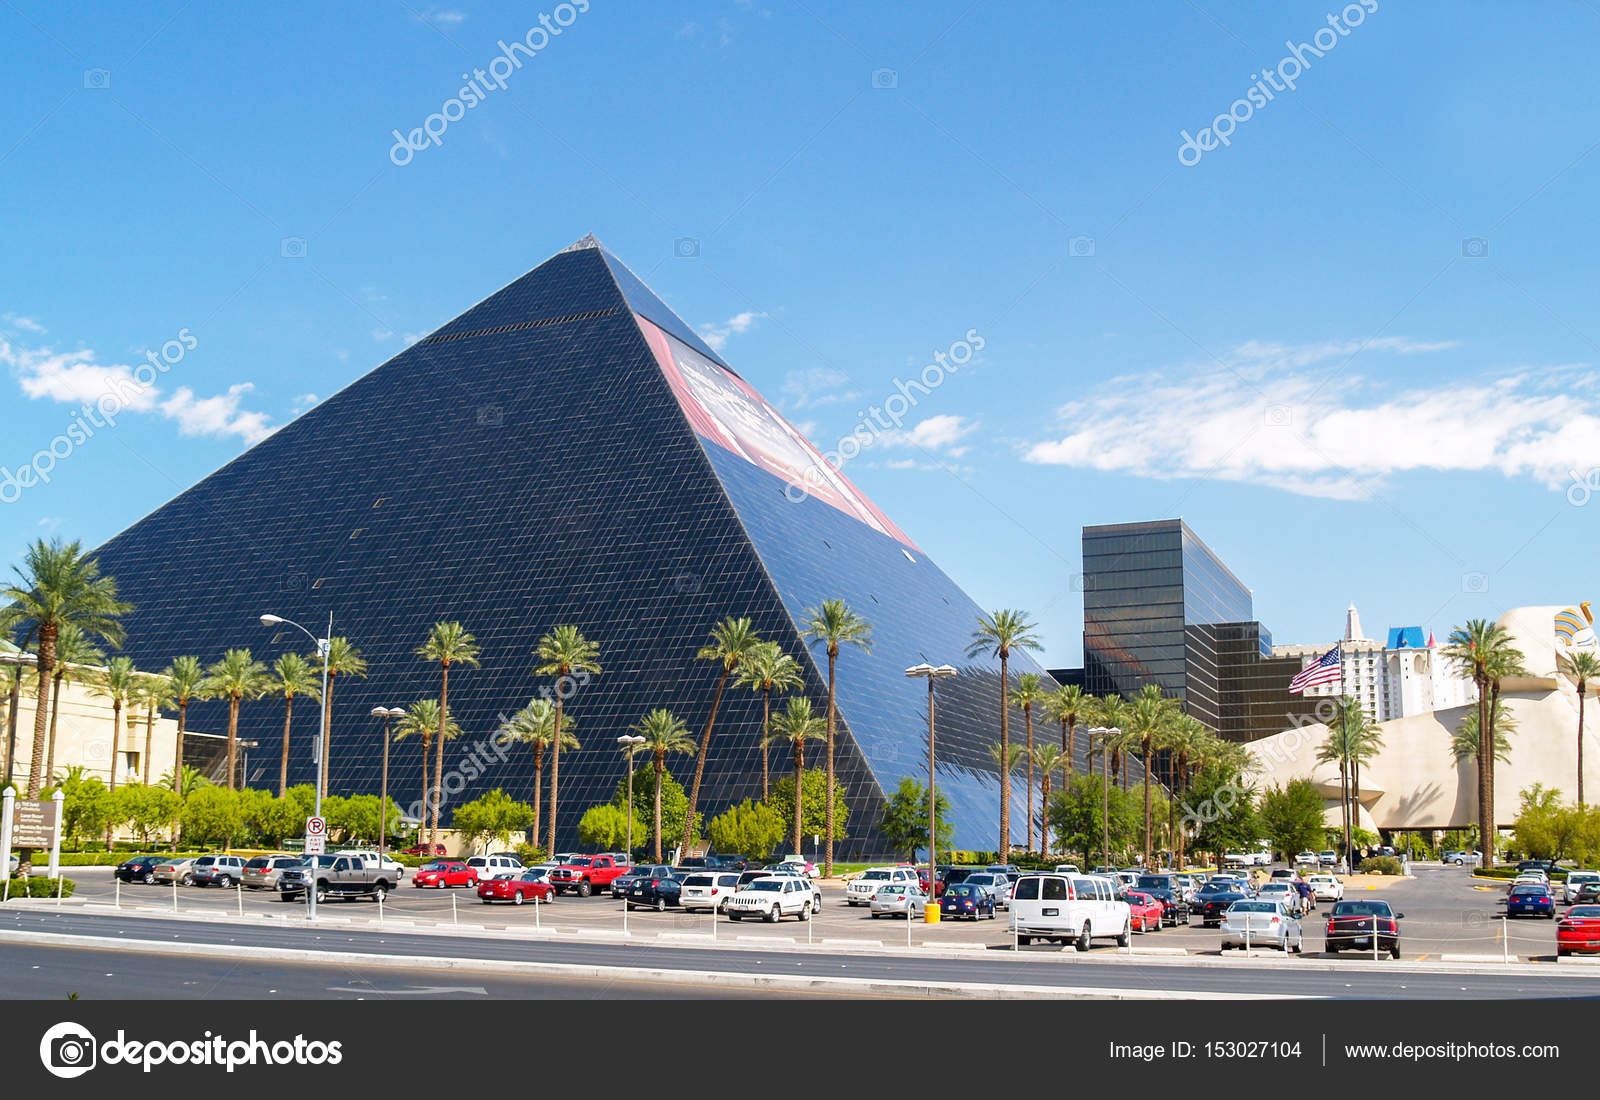 Large Black Pyramid Styled Shape Of Luxor Casino Hotel From The